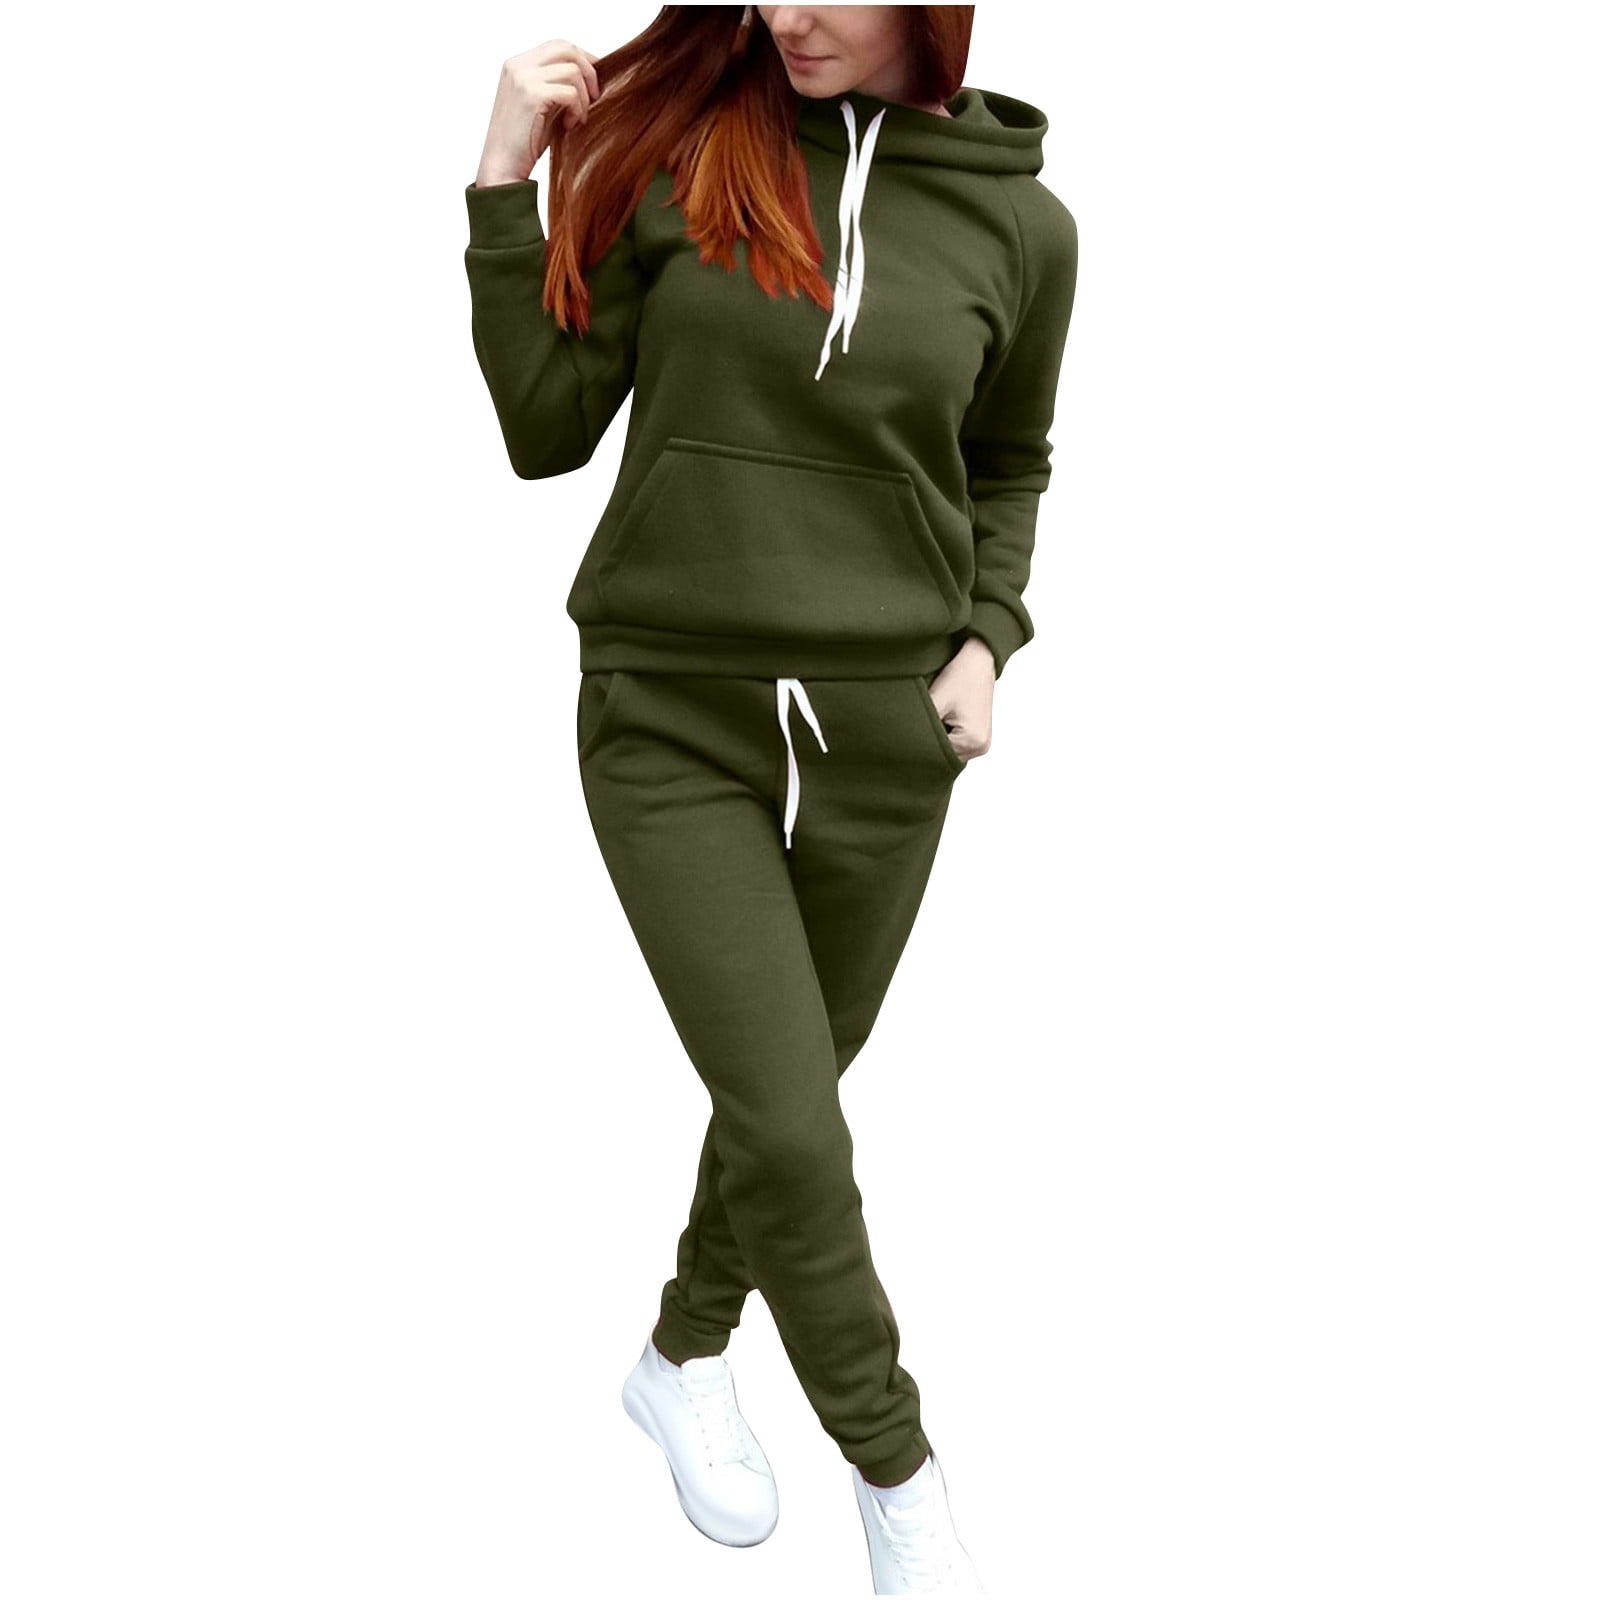 FAIWAD Women 2 Piece Outfits Casual Sweatsuit Hooded